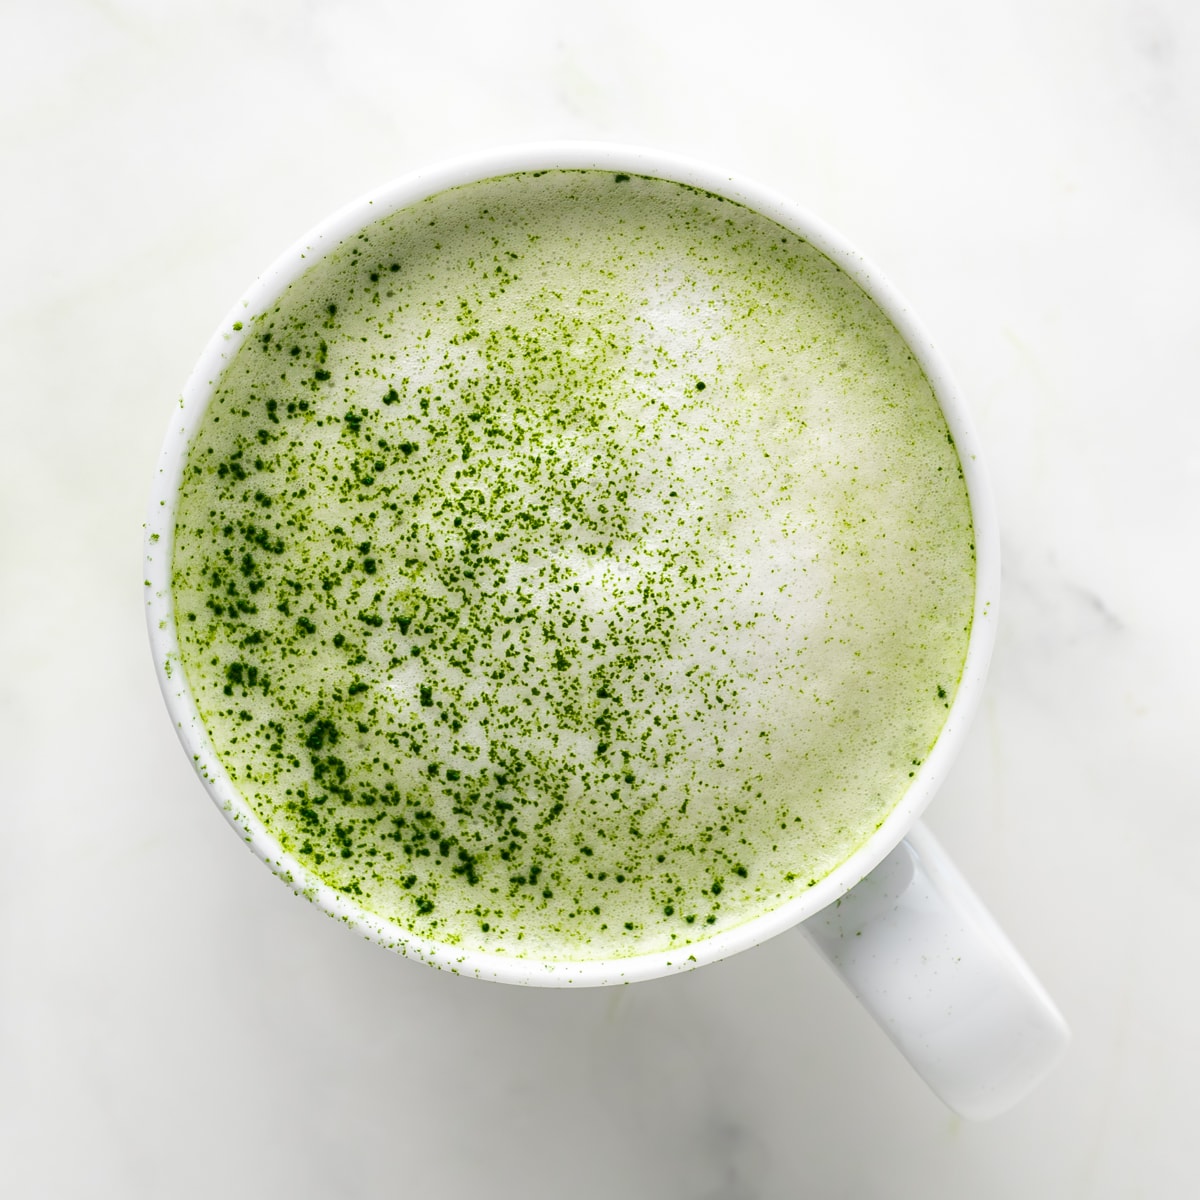 A frothed almond milk matcha latte with dusted matcha powder on top.